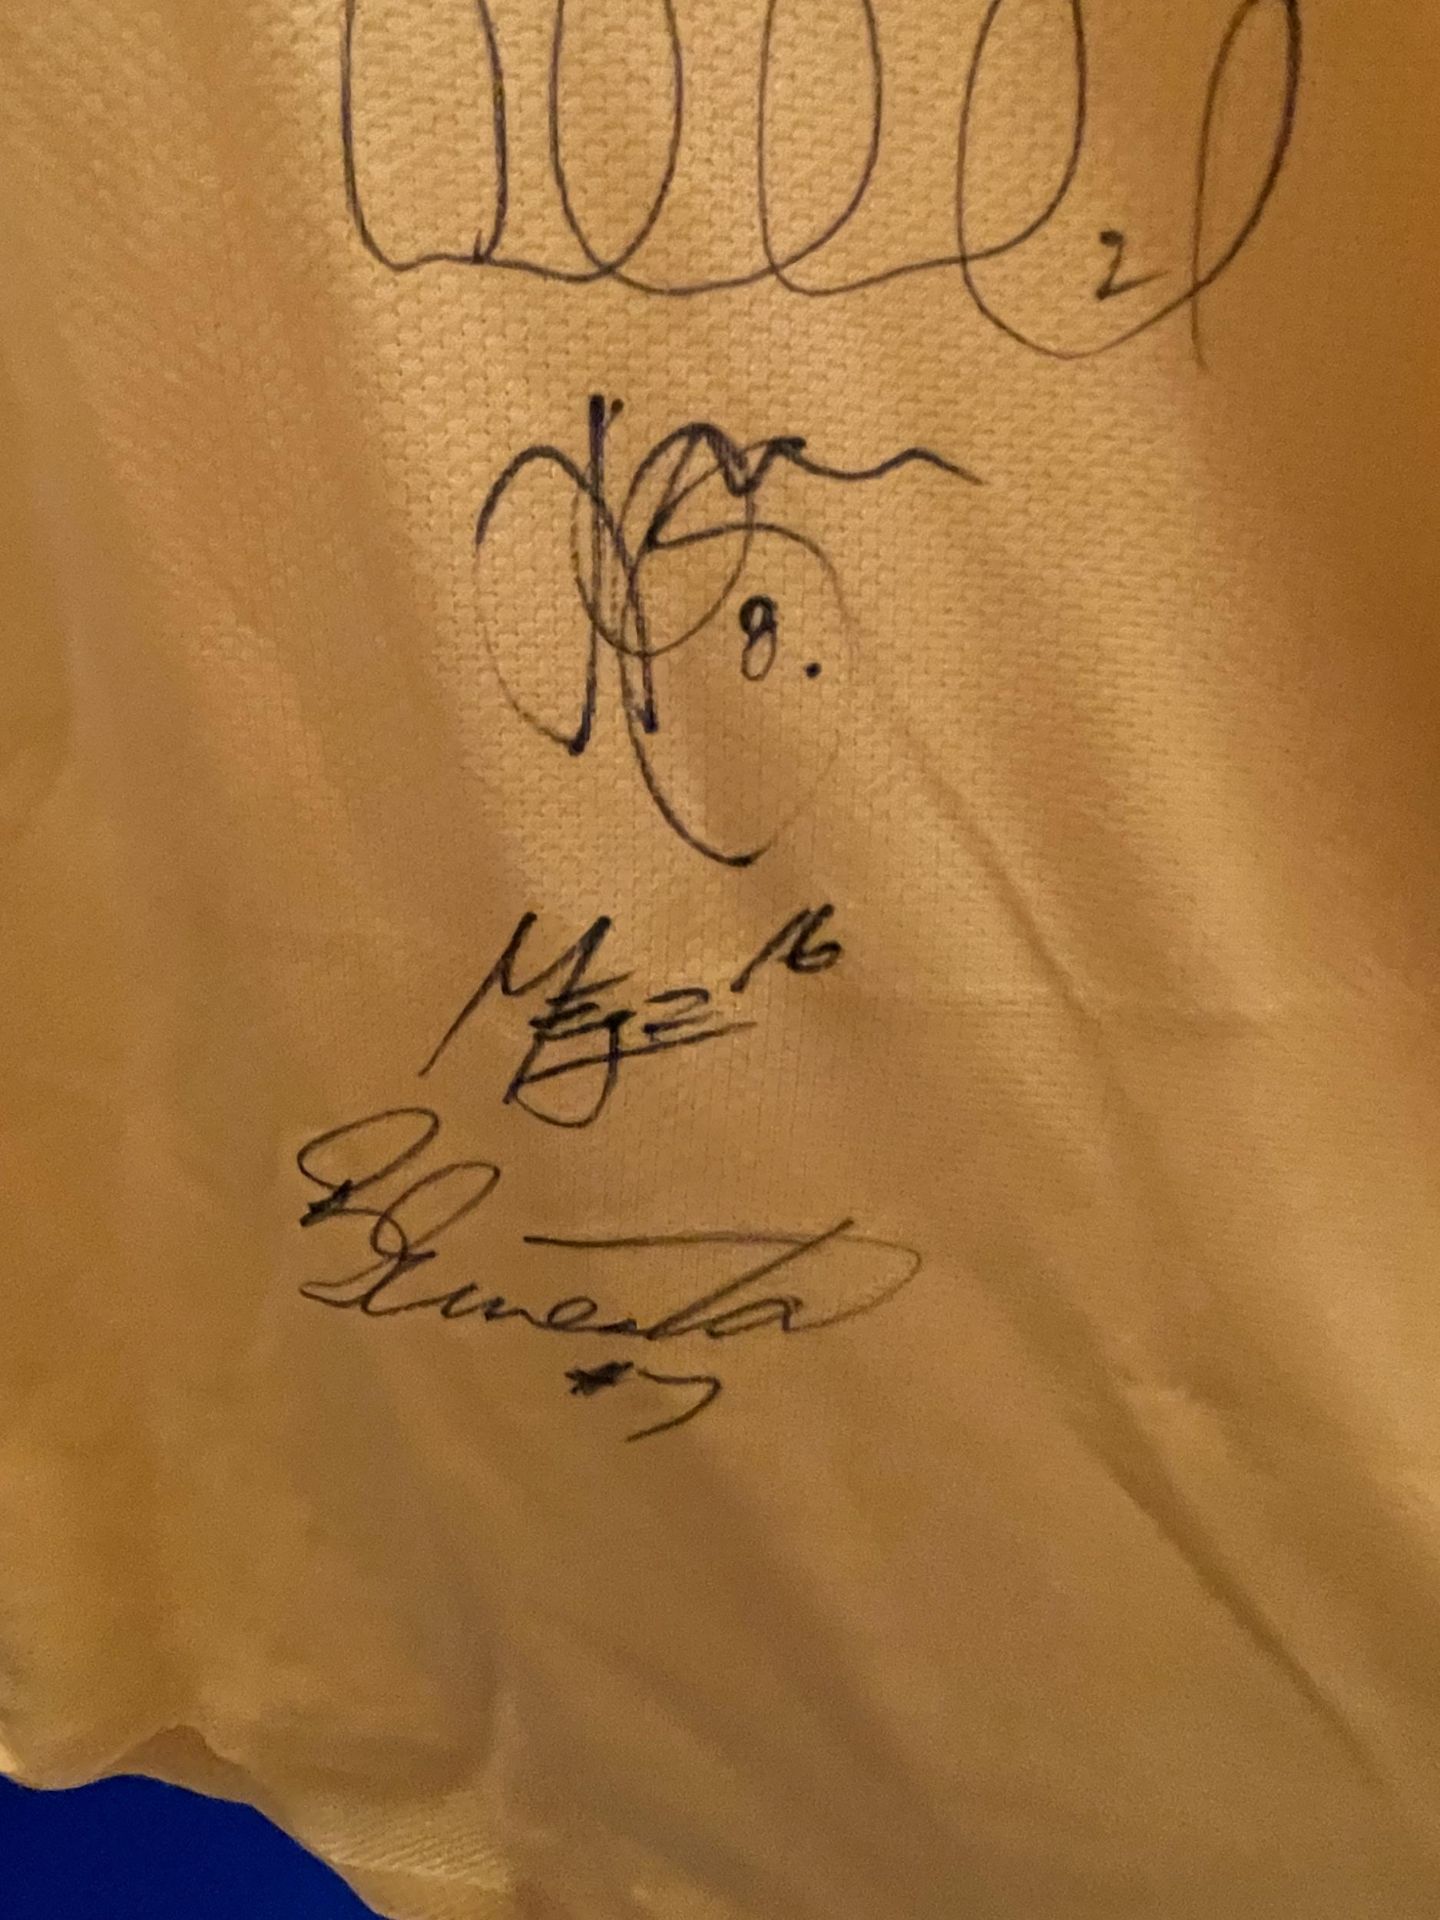 A SIGNED AUSTRALIAN FIFA 2006 WORLD CUP, GERMANY SHIRT - Image 9 of 9